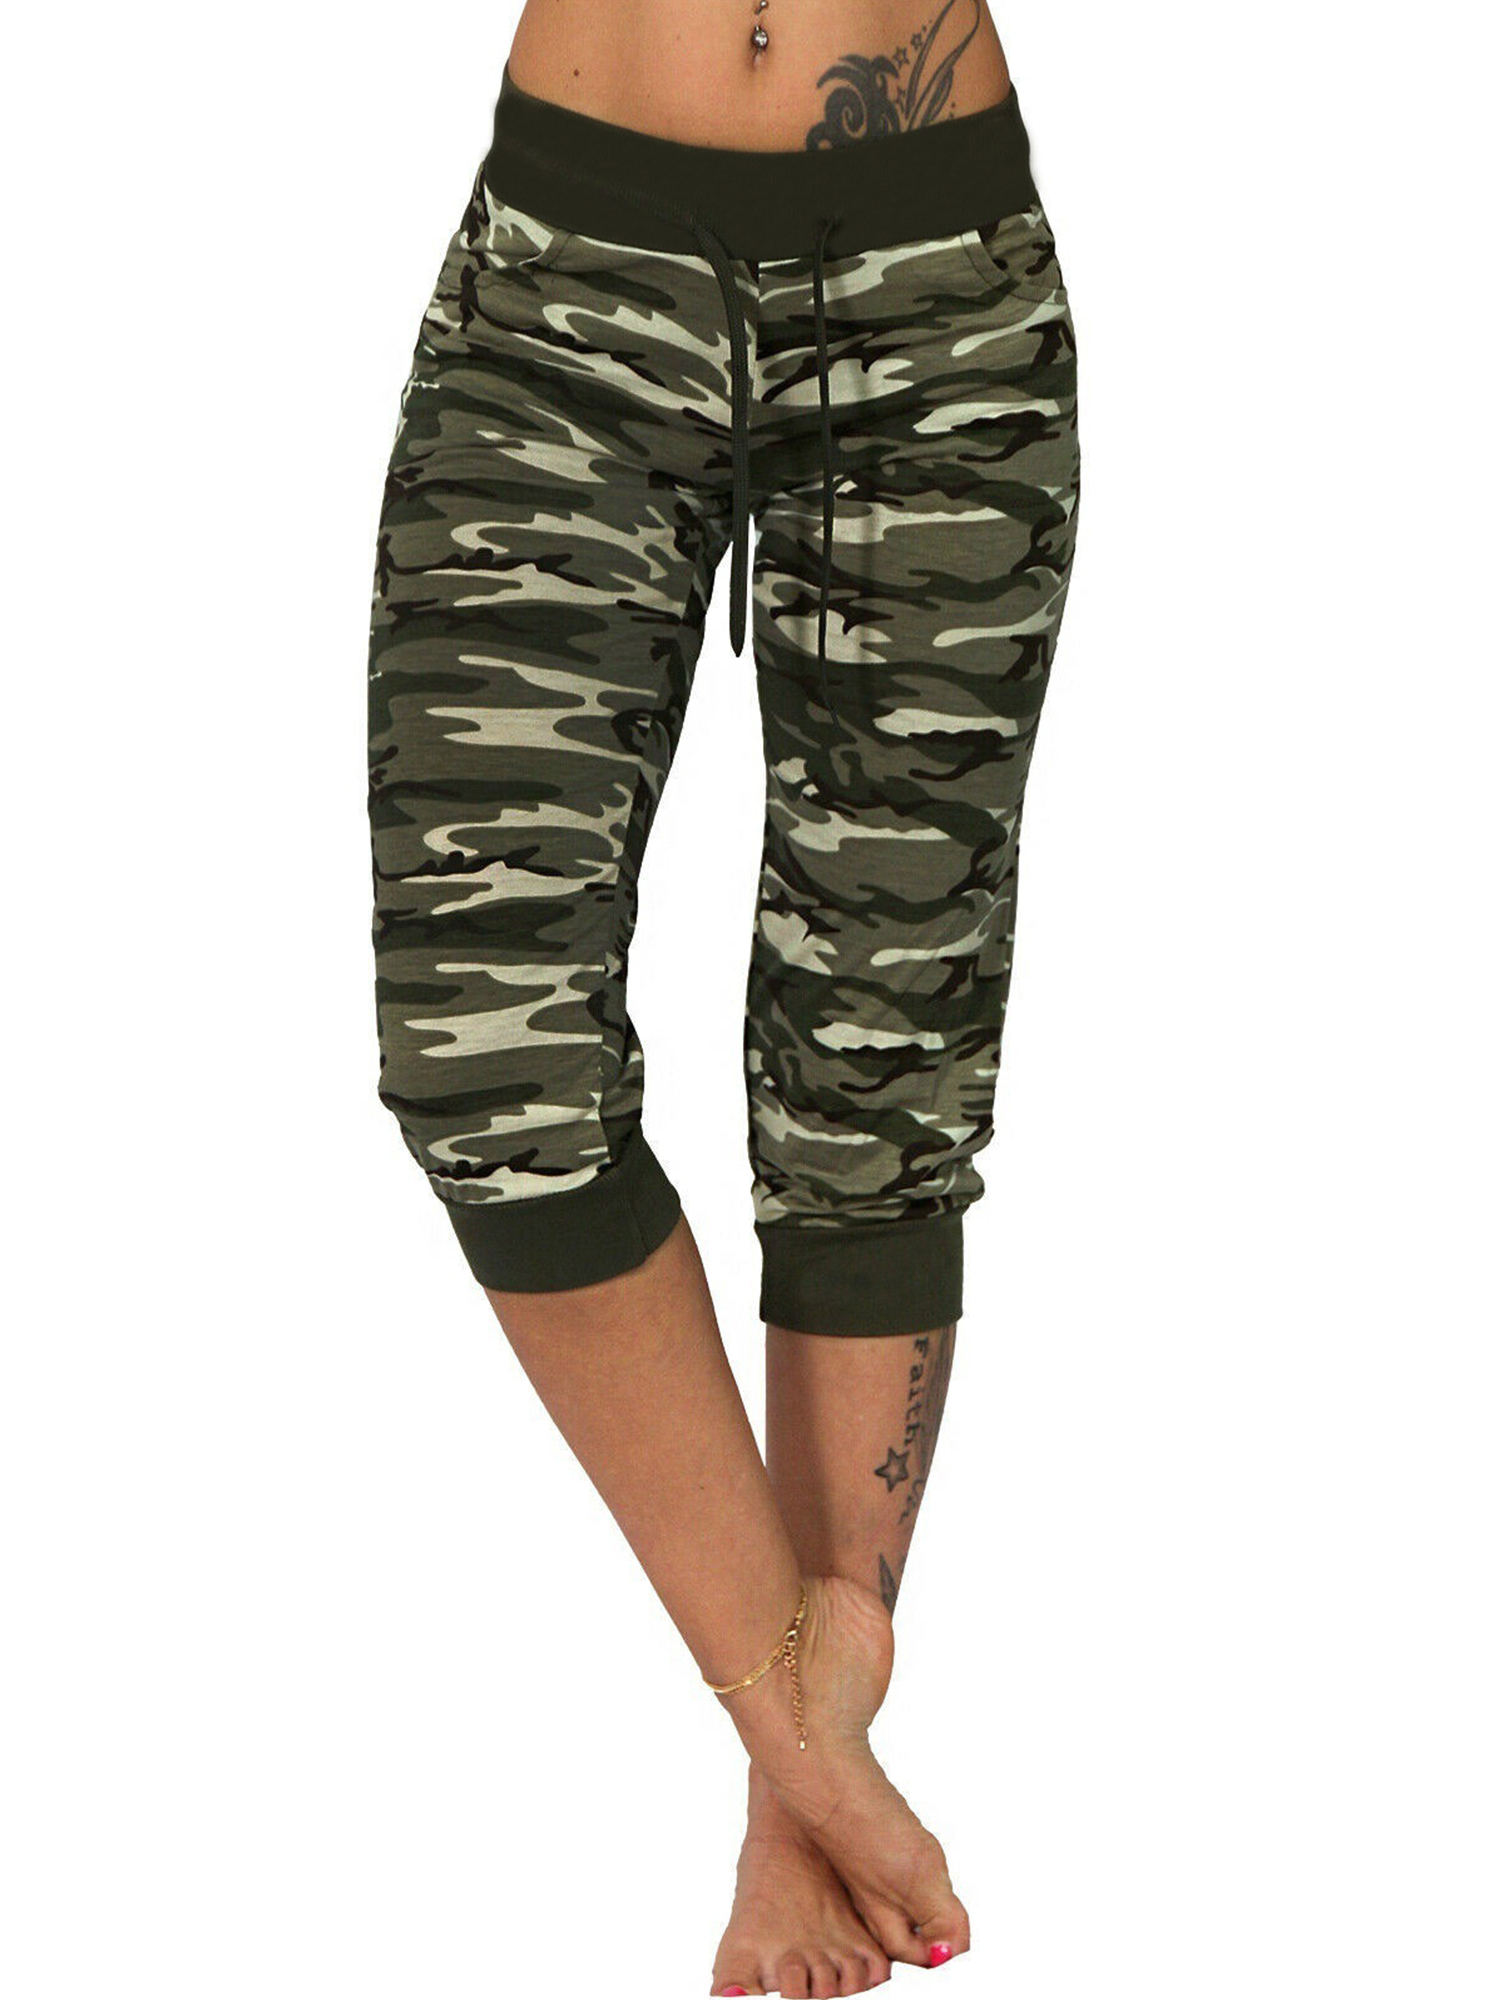 (2 Packs) Juniors' Plus Size Camo Sports Yoga Crop Jeggings High Waist Tummy Control Oversized Camouflage Pants - image 4 of 5